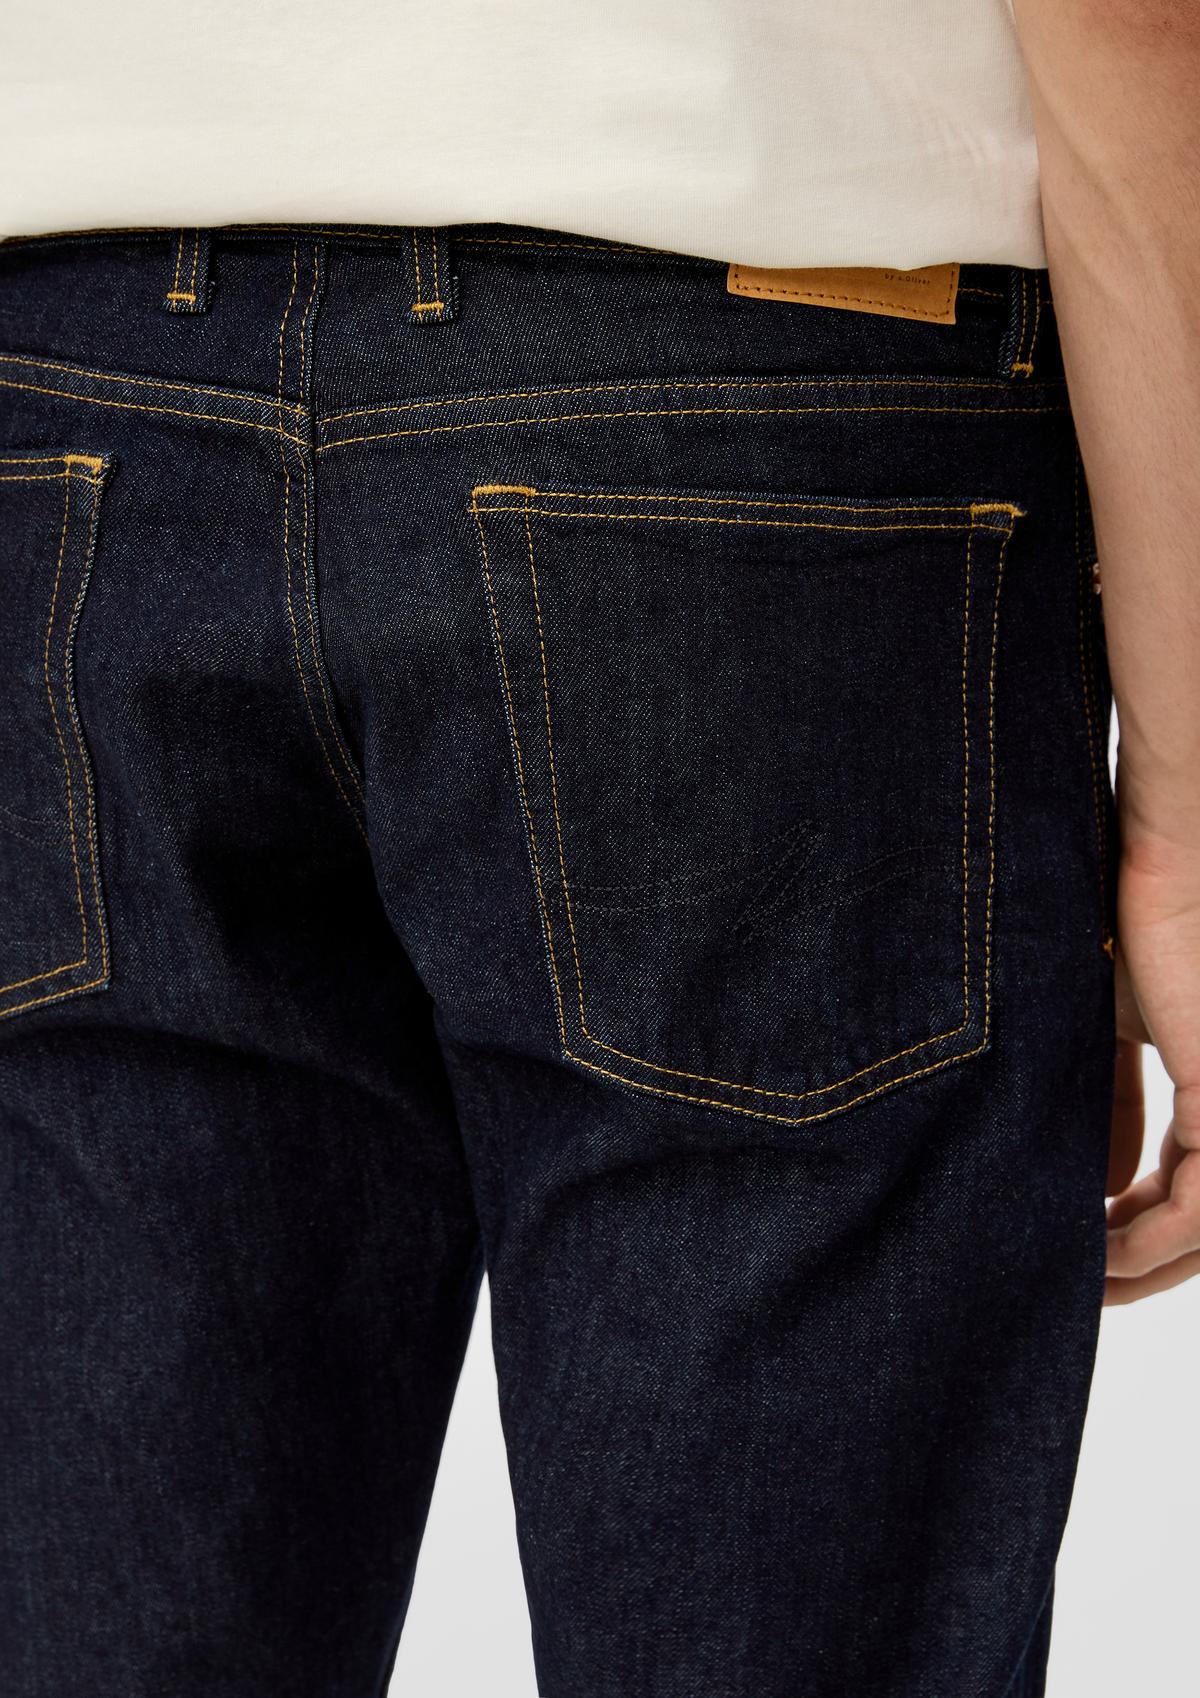 s.Oliver Pete: jeans with an adjustable waistband